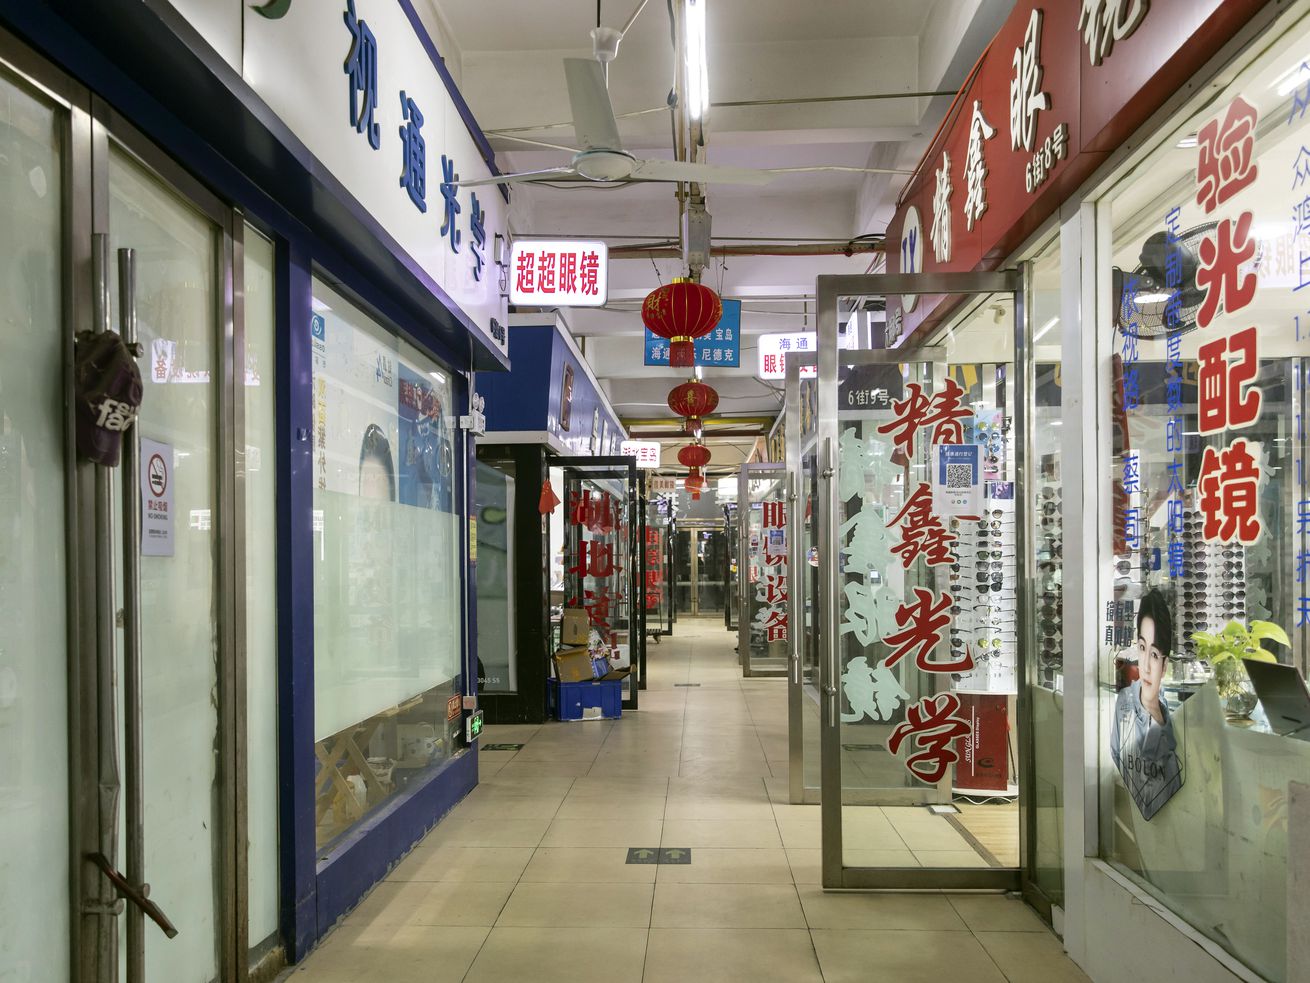 A narrow aisle in an indoor mall in China.